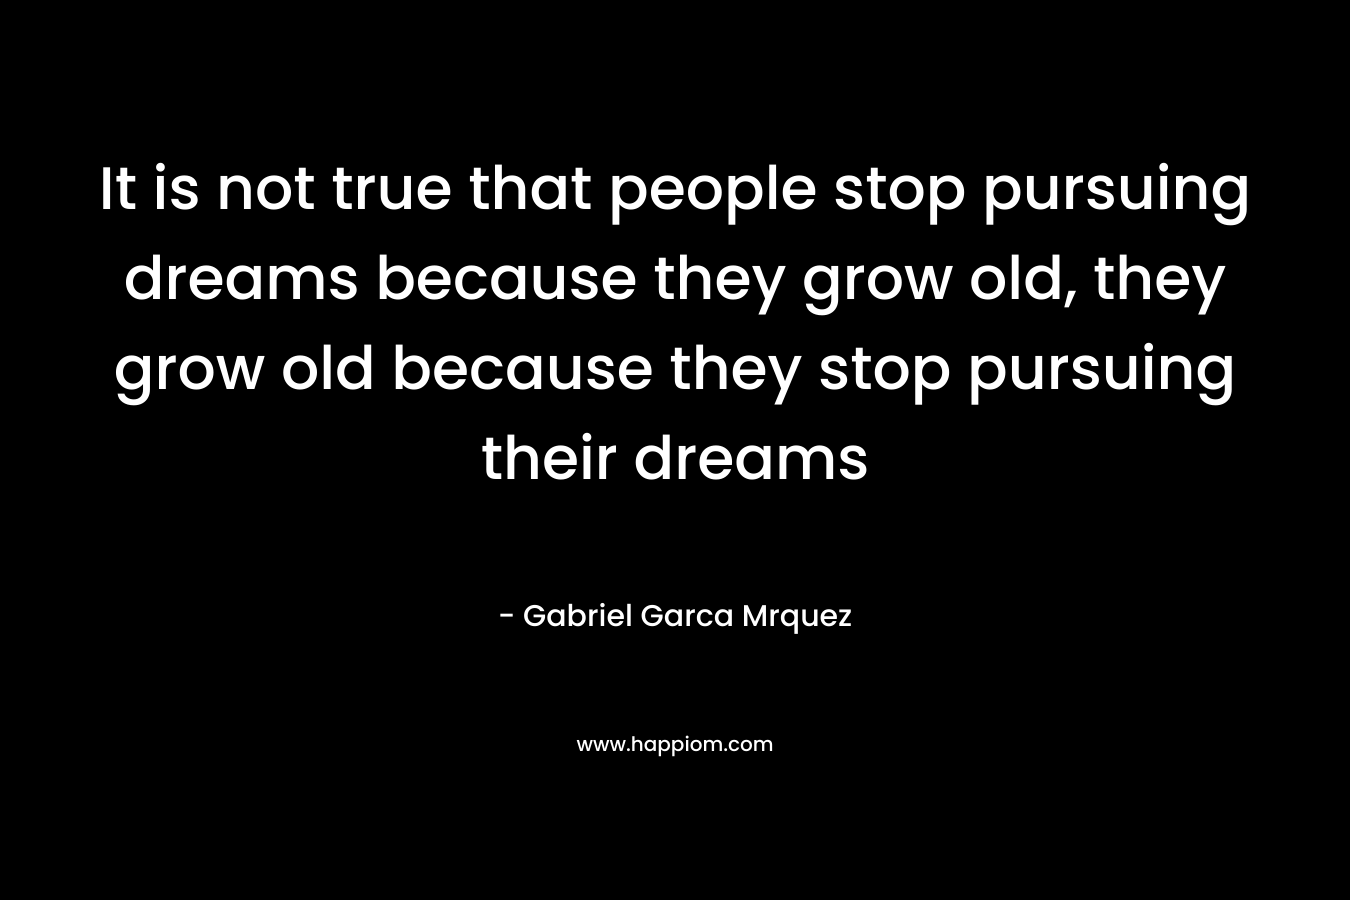 It is not true that people stop pursuing dreams because they grow old, they grow old because they stop pursuing their dreams